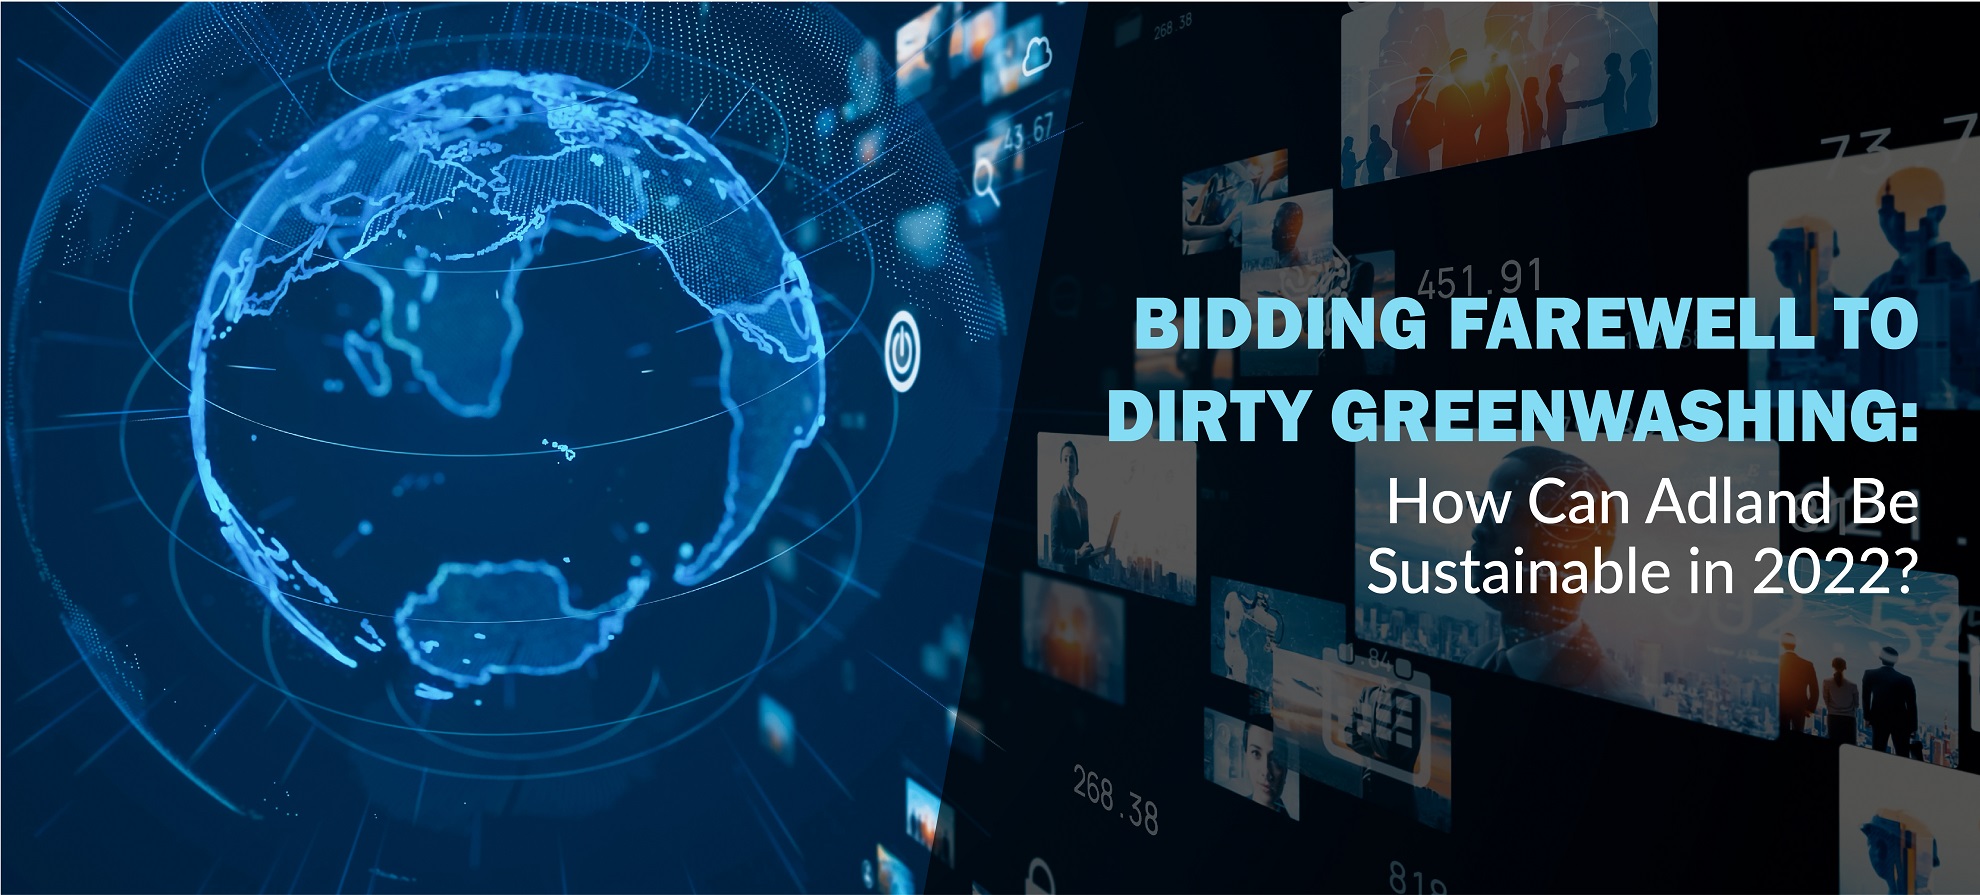 Bidding Farewell to Dirty Greenwashing: How Can Adland Be Sustainable in 2022?